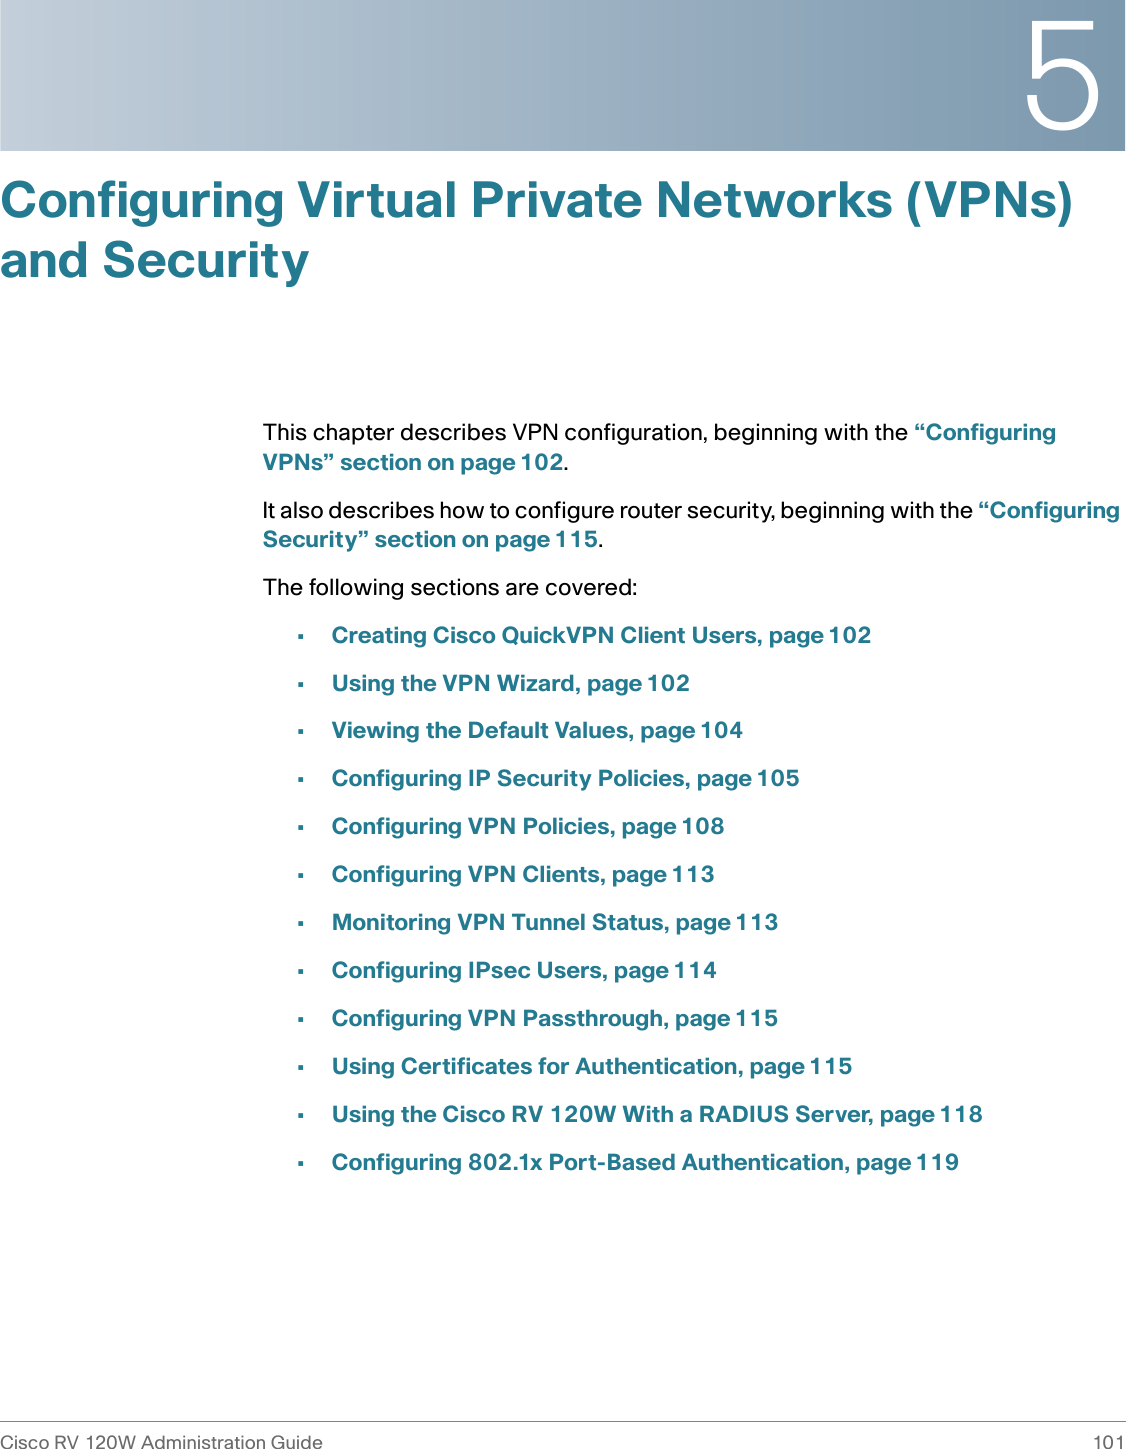 5Cisco RV 120W Administration Guide 101 Configuring Virtual Private Networks (VPNs) and SecurityThis chapter describes VPN configuration, beginning with the “Configuring VPNs” section on page 102.It also describes how to configure router security, beginning with the “Configuring Security” section on page 115.The following sections are covered:•Creating Cisco QuickVPN Client Users, page 102•Using the VPN Wizard, page 102•Viewing the Default Values, page 104•Configuring IP Security Policies, page 105•Configuring VPN Policies, page 108•Configuring VPN Clients, page 113•Monitoring VPN Tunnel Status, page 113•Configuring IPsec Users, page 114•Configuring VPN Passthrough, page 115•Using Certificates for Authentication, page 115•Using the Cisco RV 120W With a RADIUS Server, page 118•Configuring 802.1x Port-Based Authentication, page 119